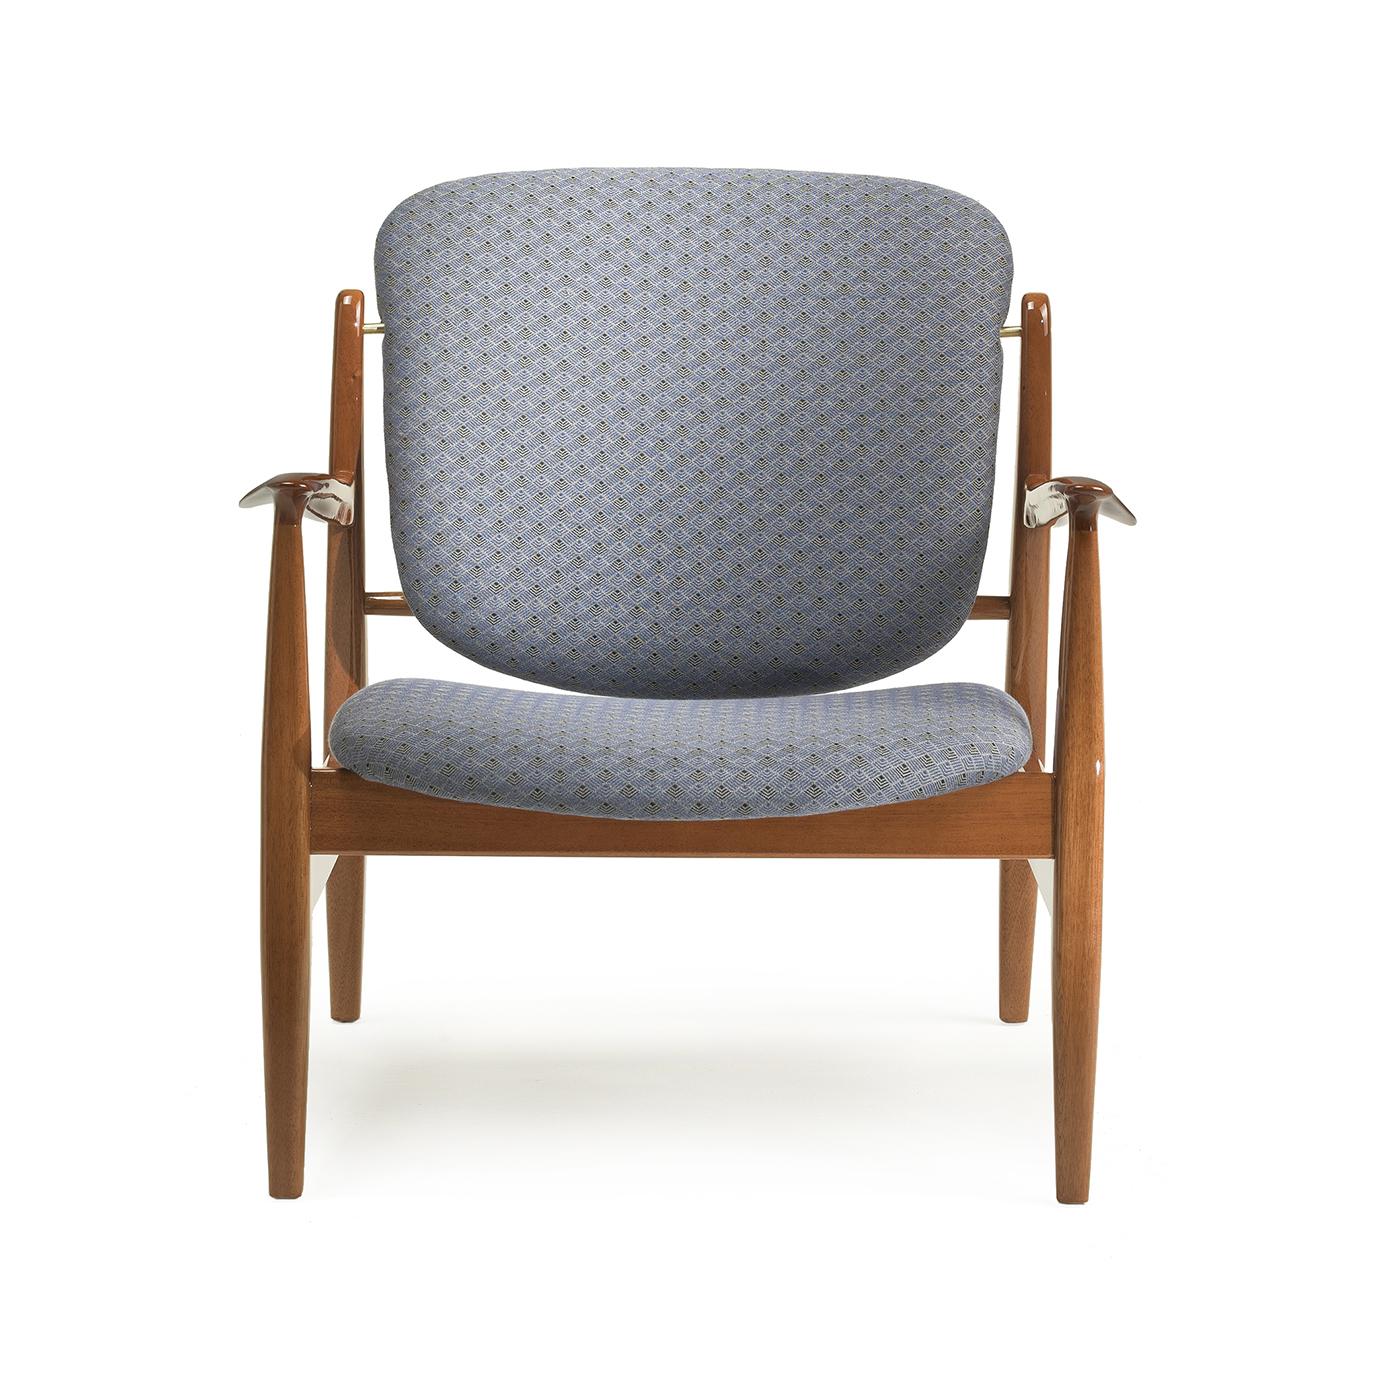 An ode to midcentury charm and comfortable sophistication, this stunning armchair will be perfect in an entryway, in a living room around the coffee table or to a bedroom as accent piece. The straight and diagonal lines of the wooden structure with